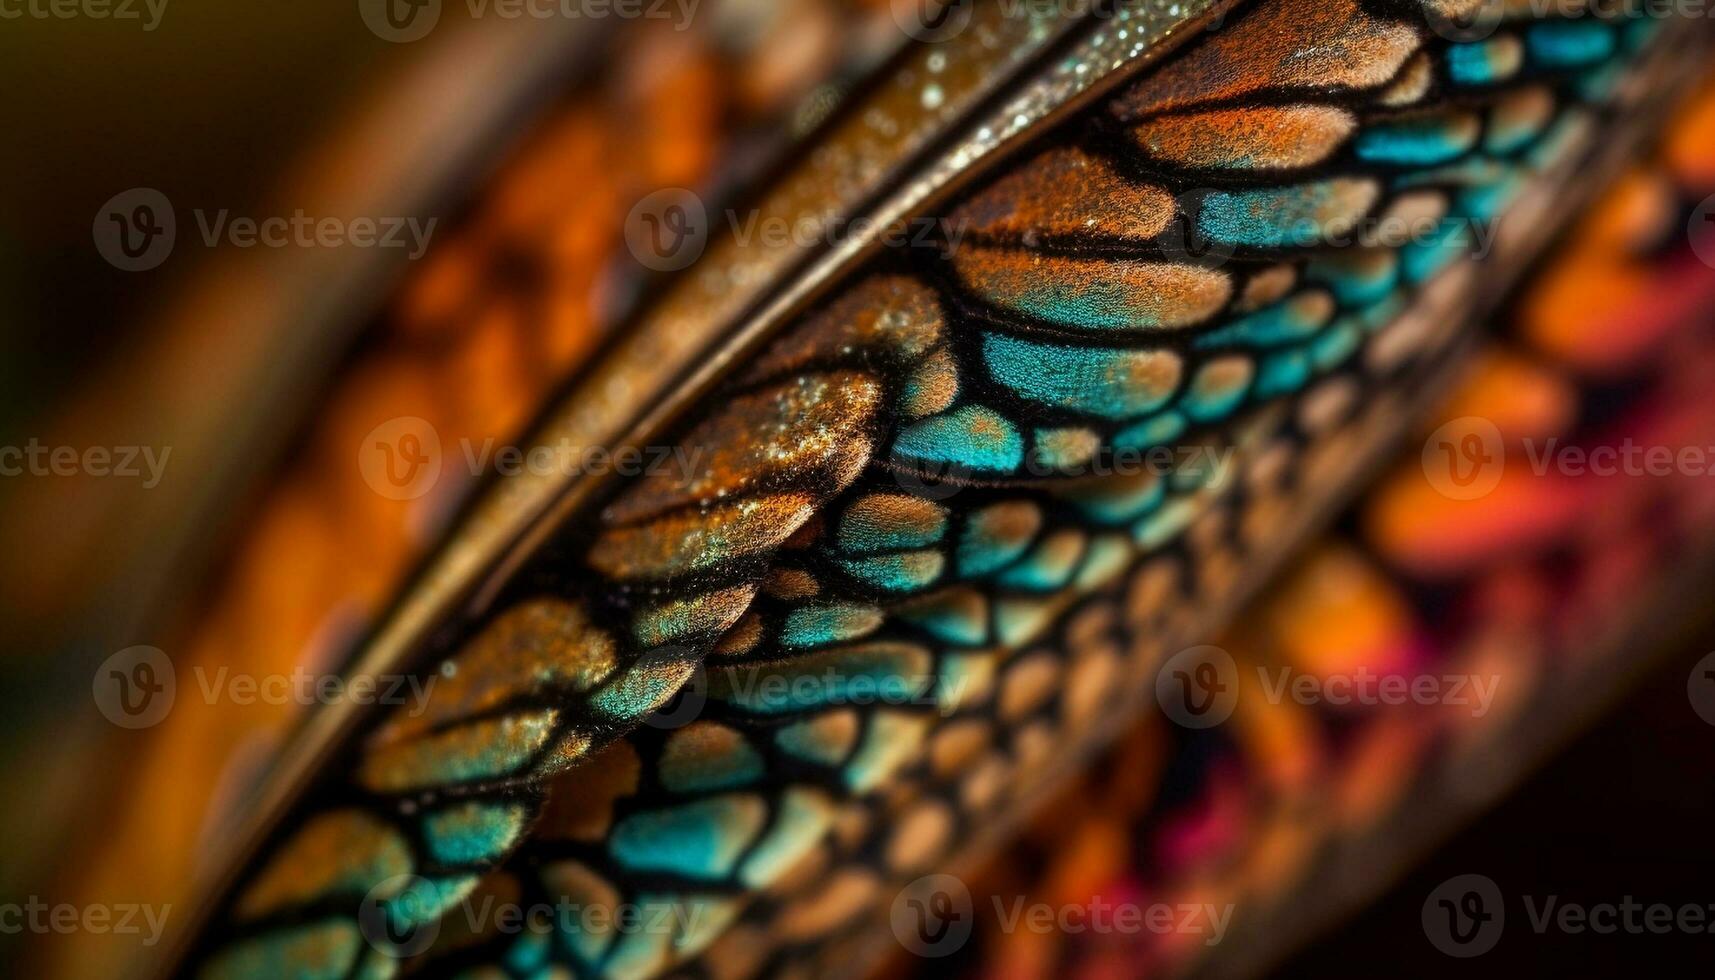 Vibrant peacock feather showcases ornate animal markings in macrophotography generated by AI photo